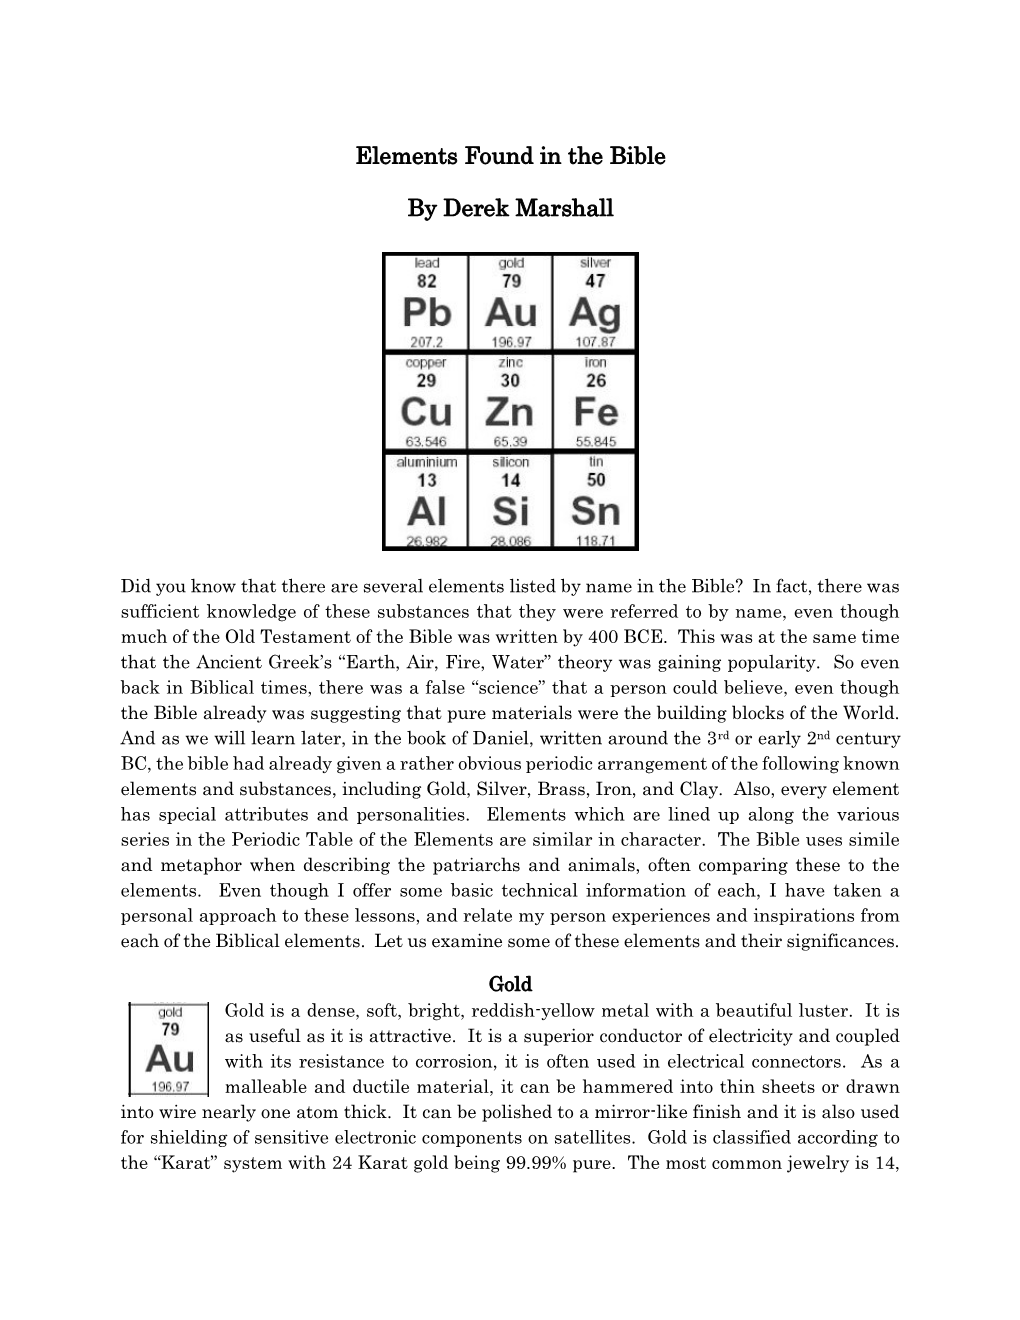 Elements Found in the Bible by Derek Marshall